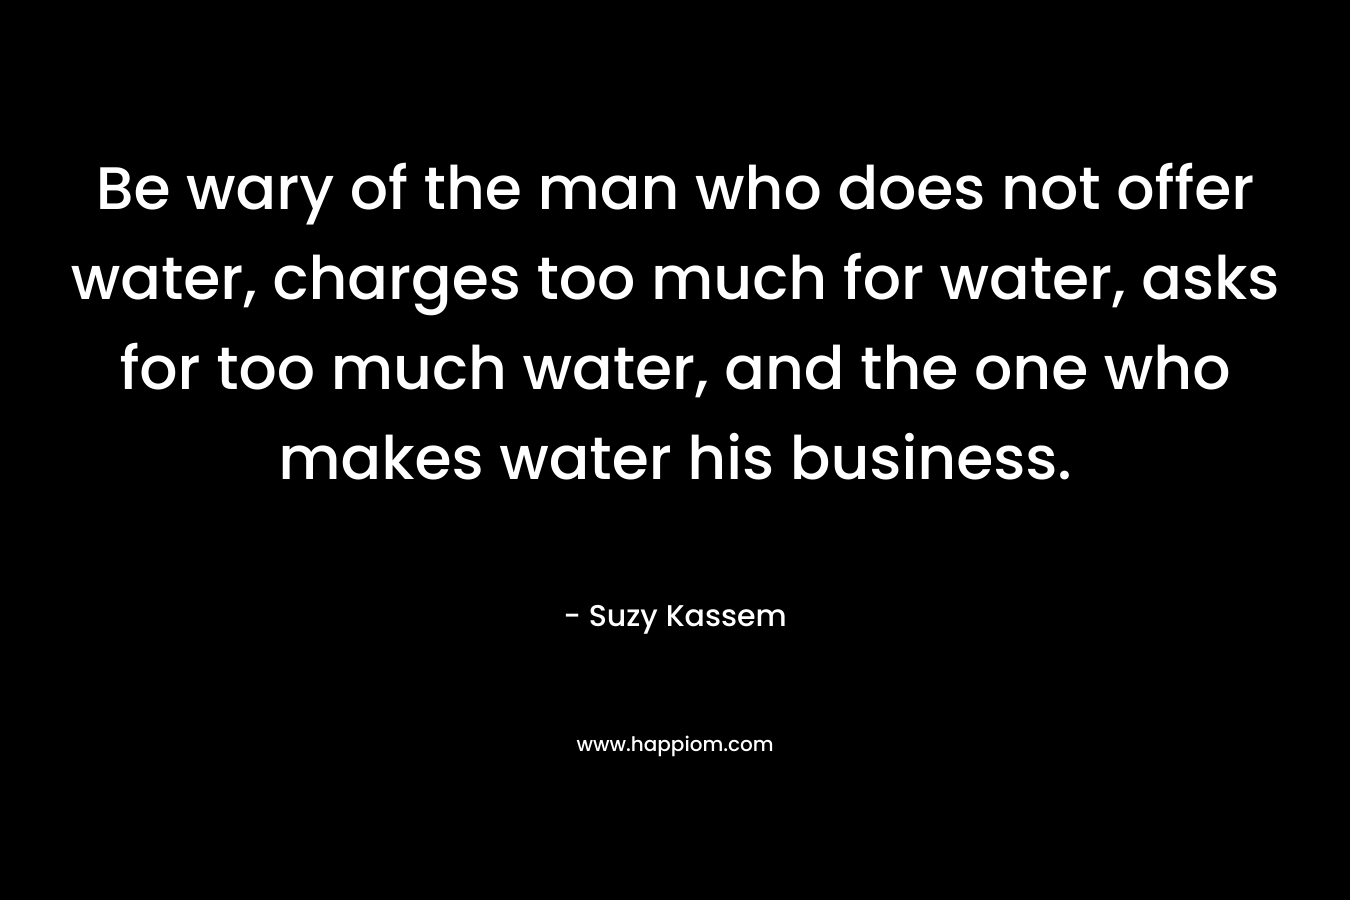 Be wary of the man who does not offer water, charges too much for water, asks for too much water, and the one who makes water his business. – Suzy Kassem